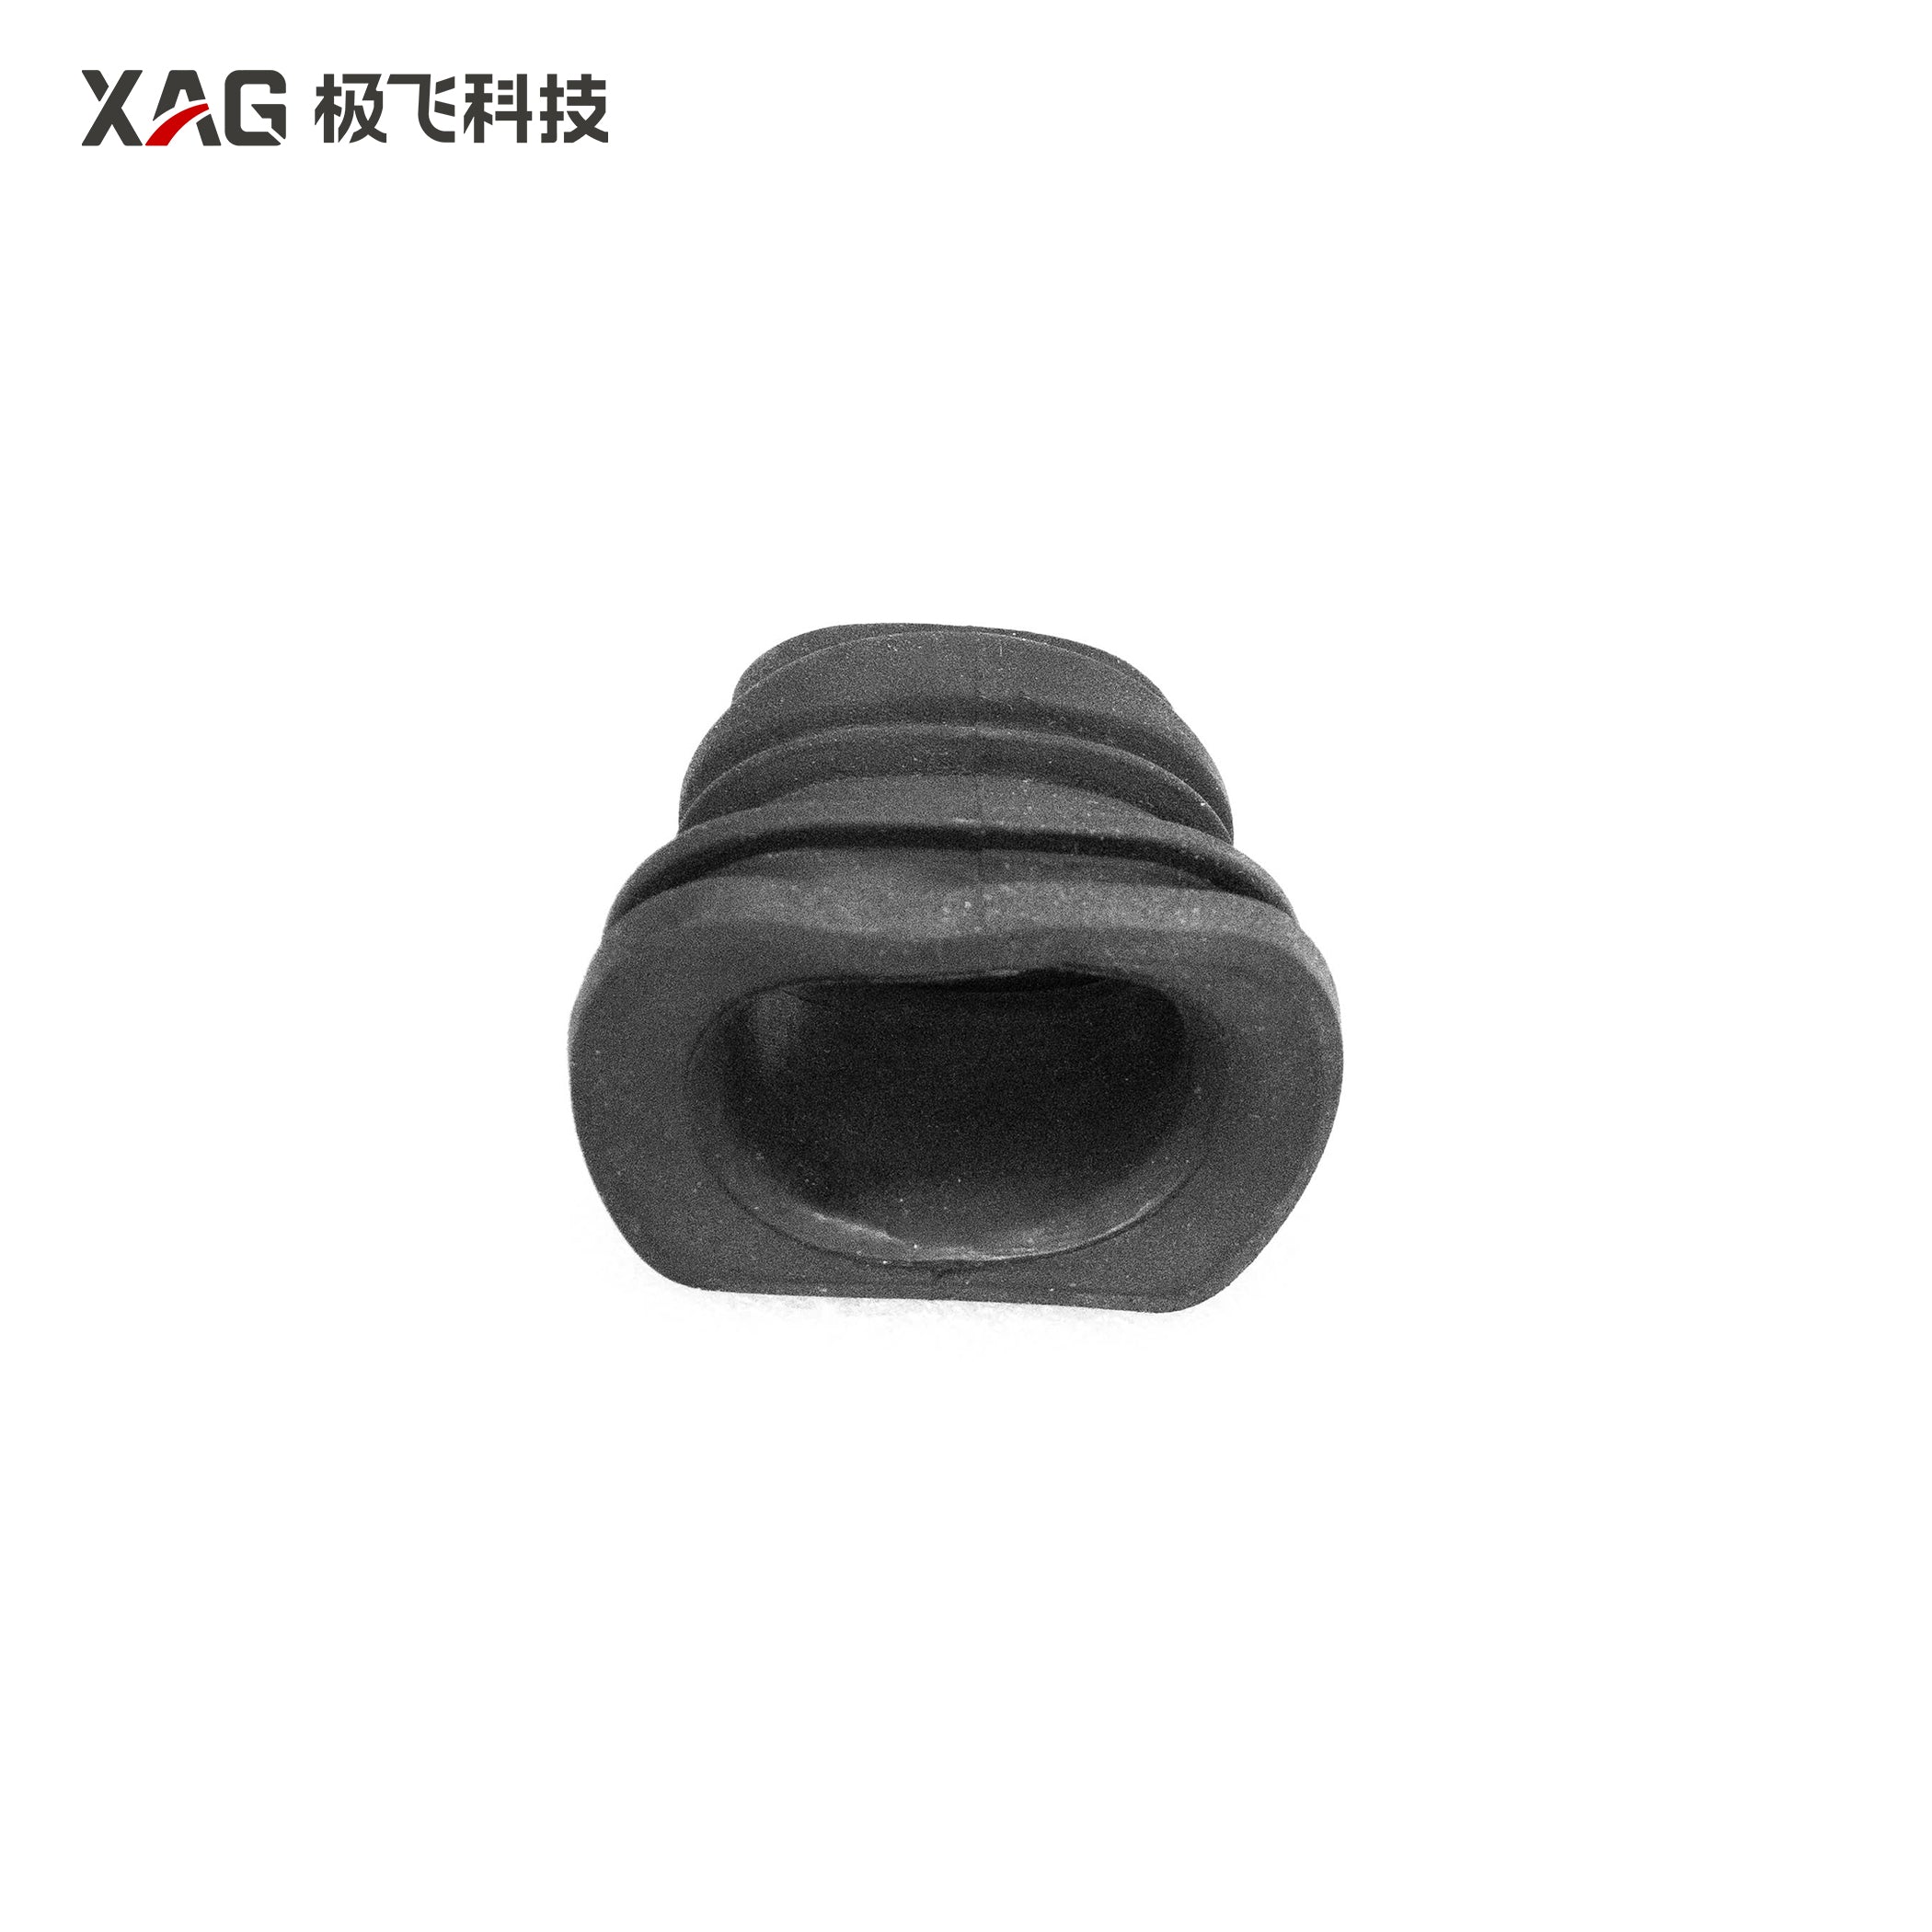 V50 Tube & Cable Rubber Protector (for Arms)